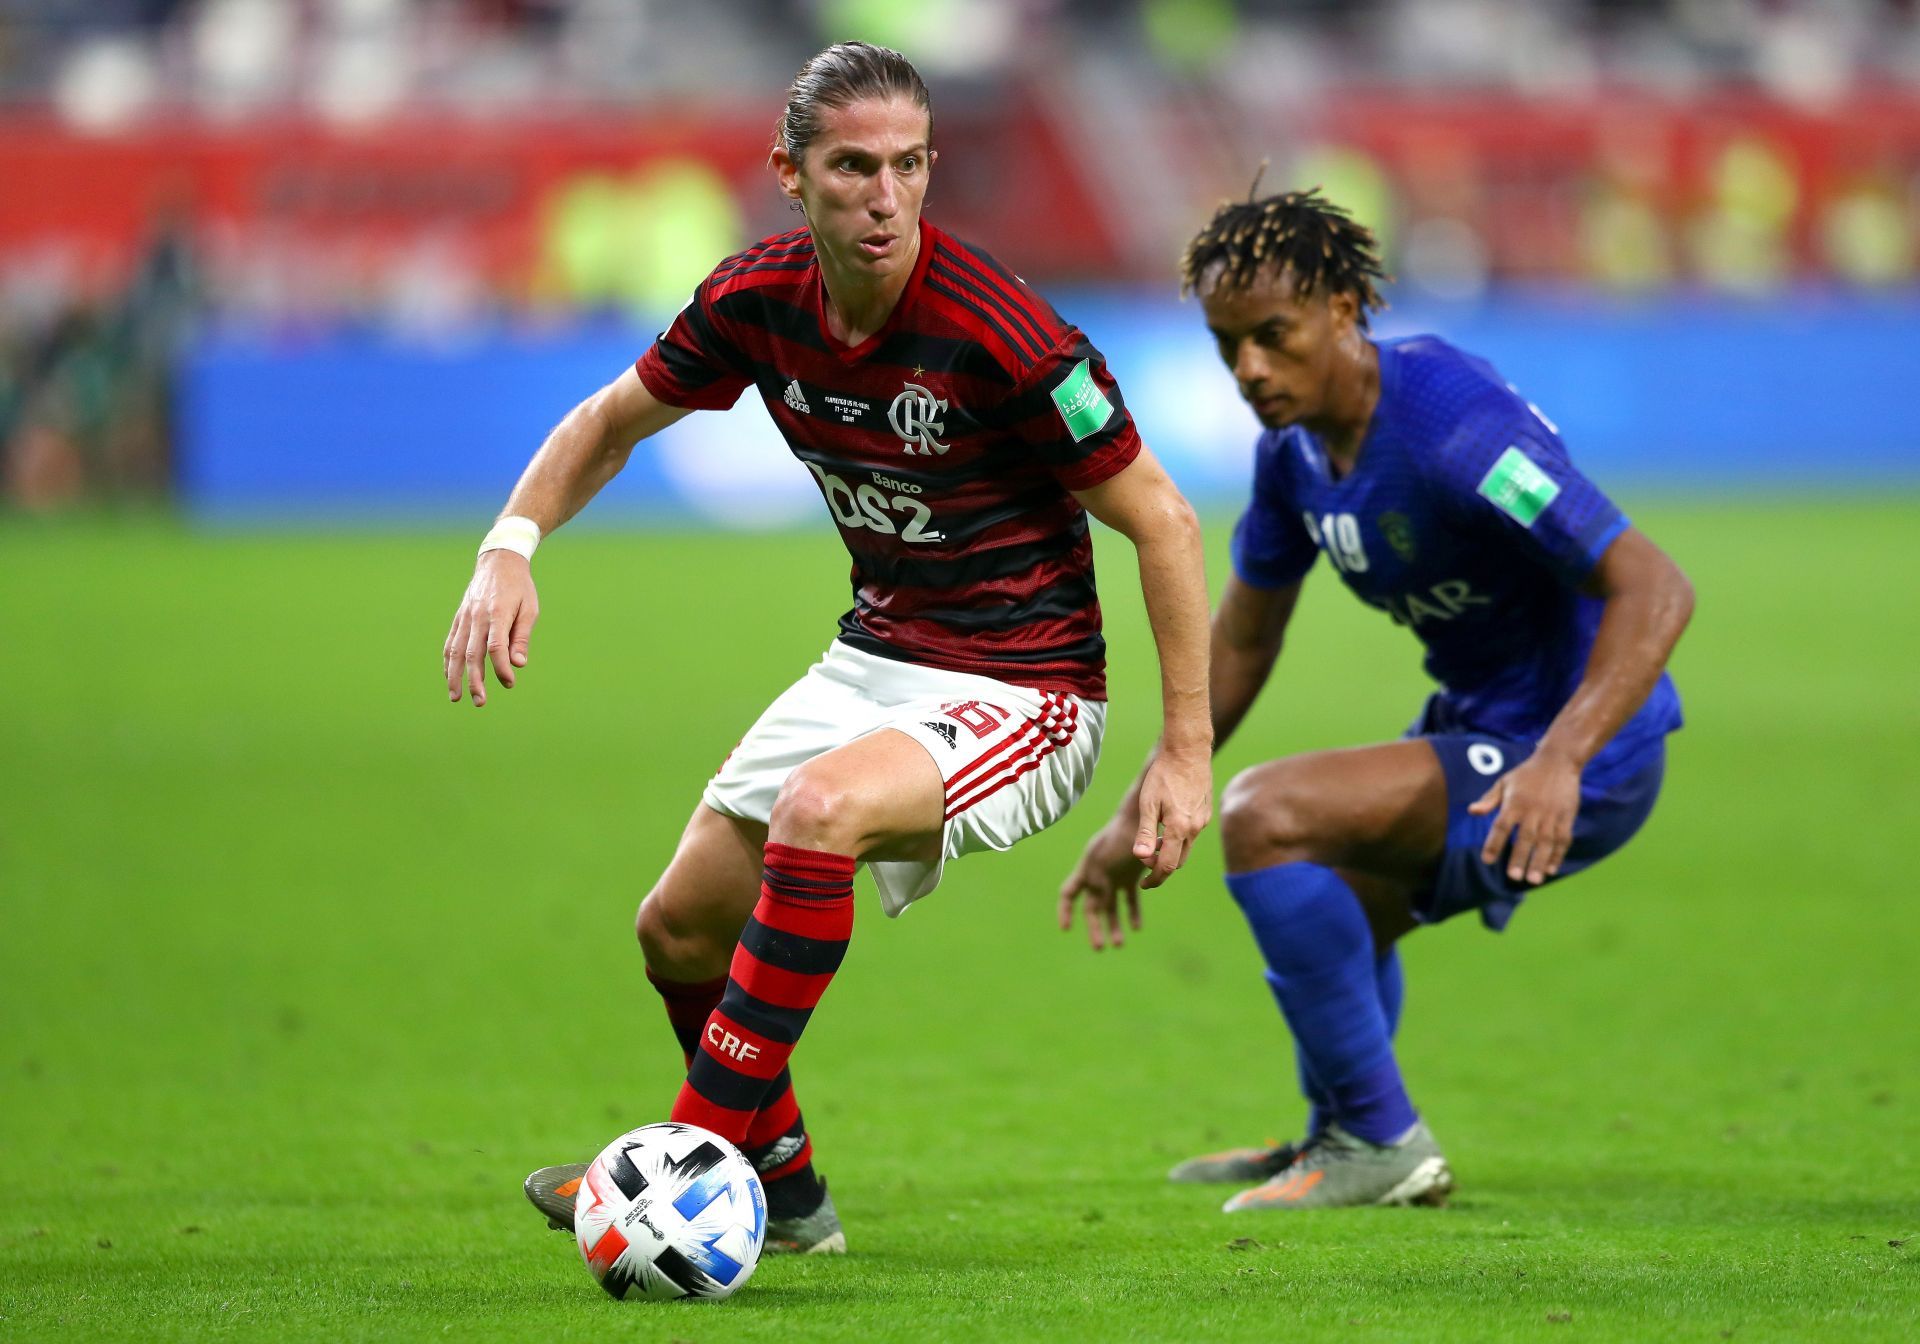 Filipe Luis will be a huge miss for Flamengo